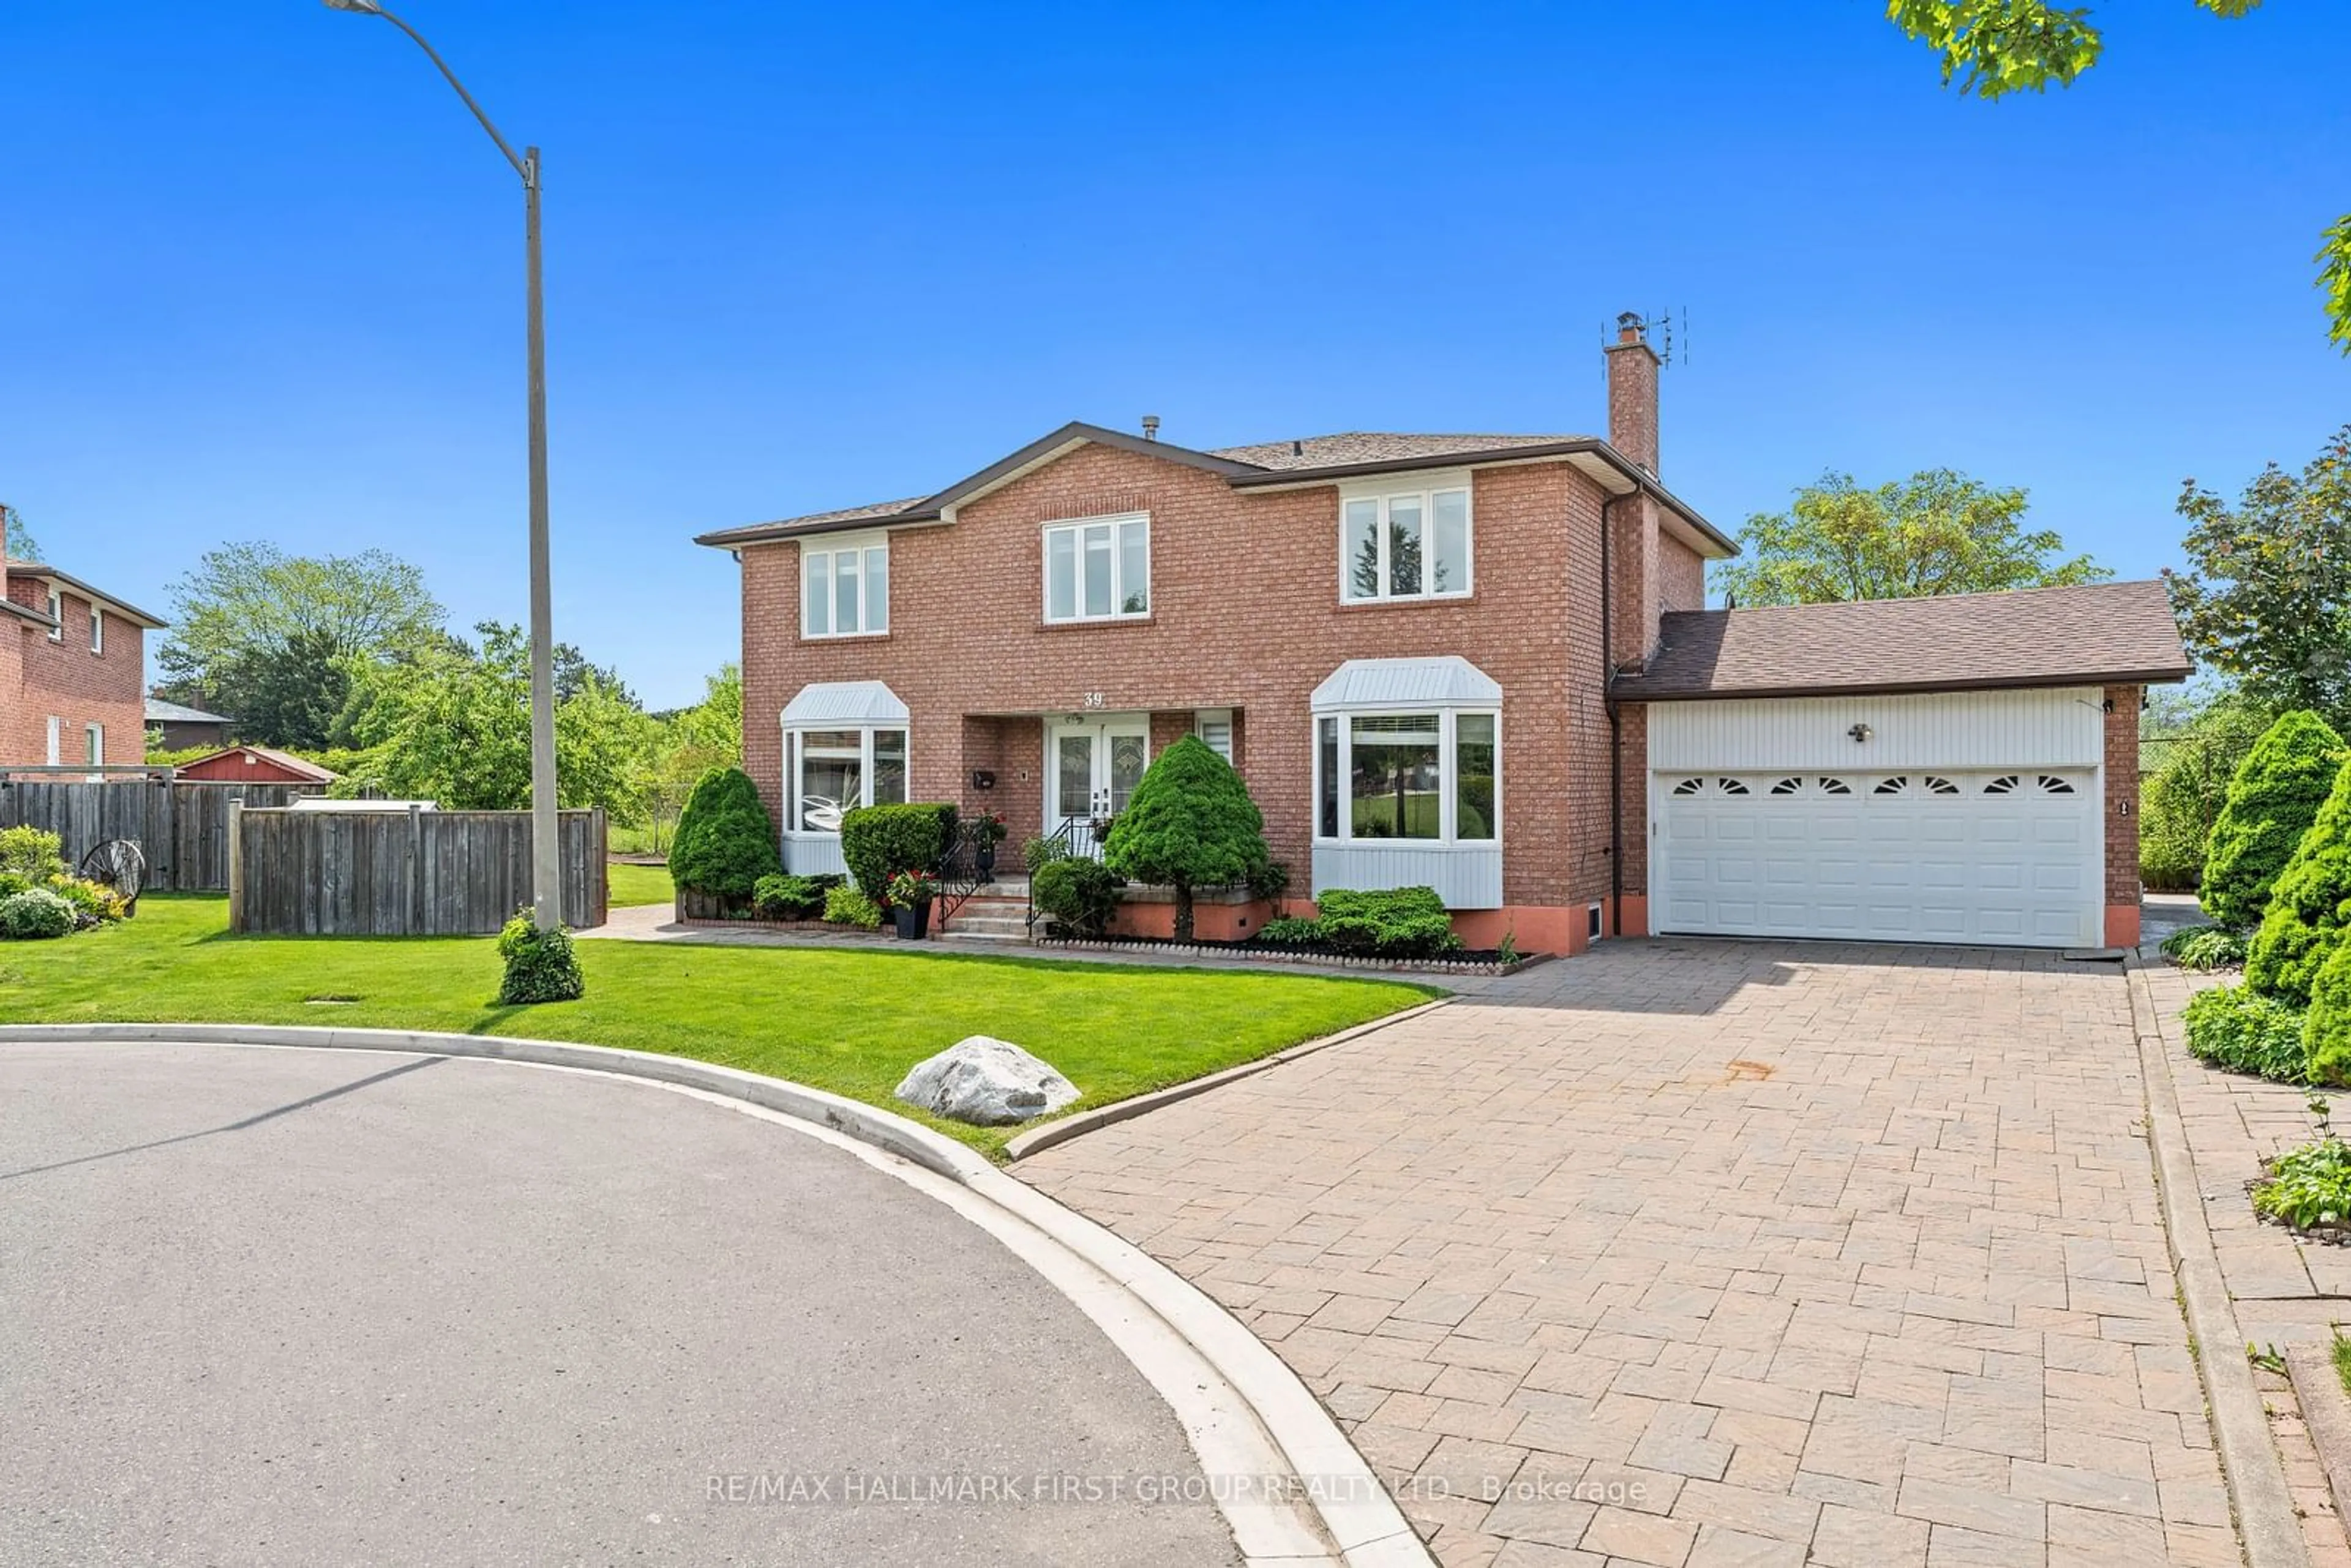 Home with brick exterior material for 39 Lord Sydenham Crt, Toronto Ontario M1W 3S4